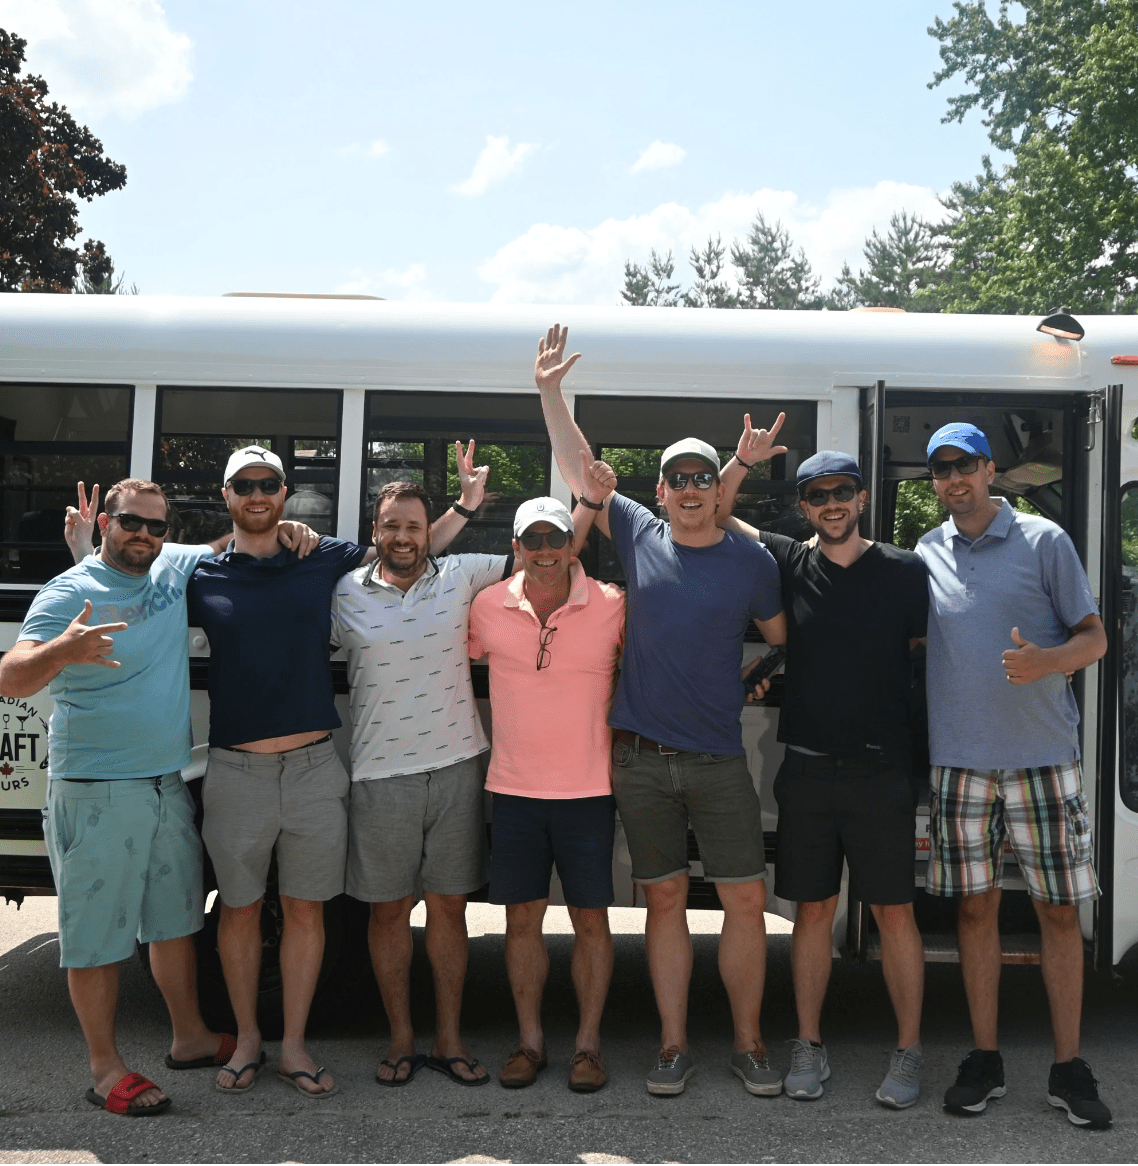 5 Tips For Planning A Bachelor Party In Canada